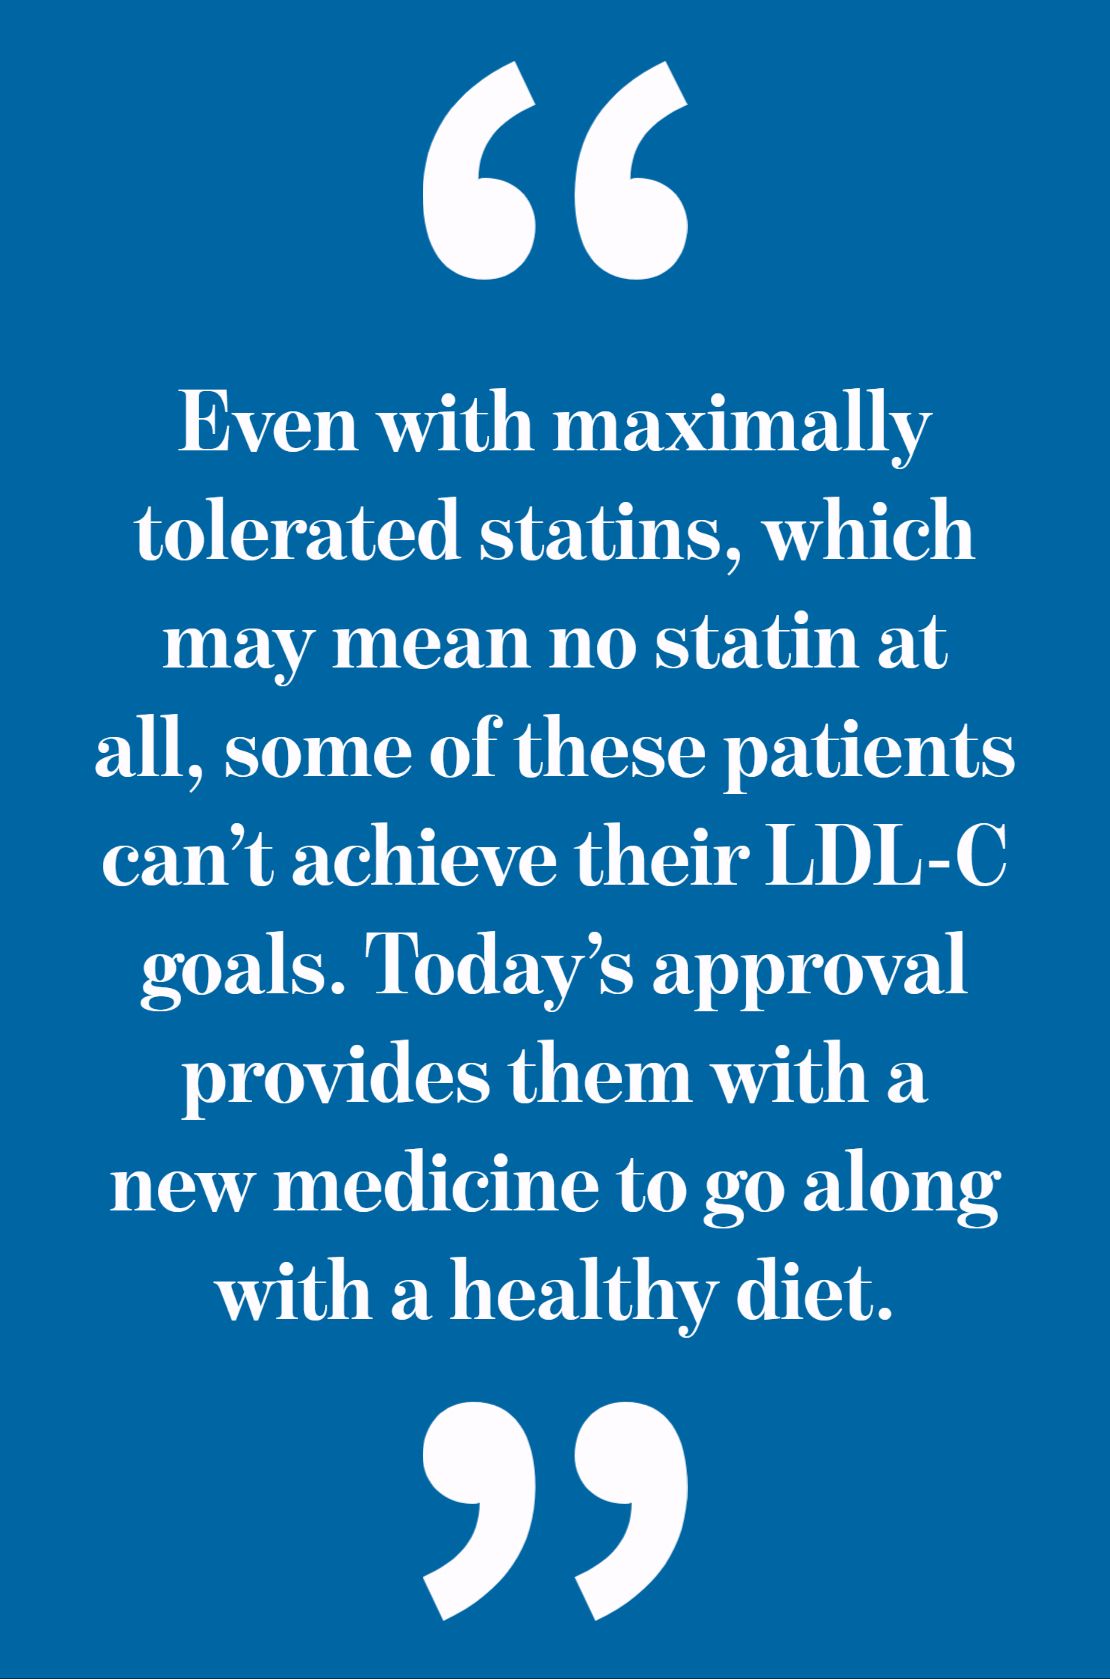 First Oral Non-Statin LDL-C Lowering Drug Approved in 2 ...